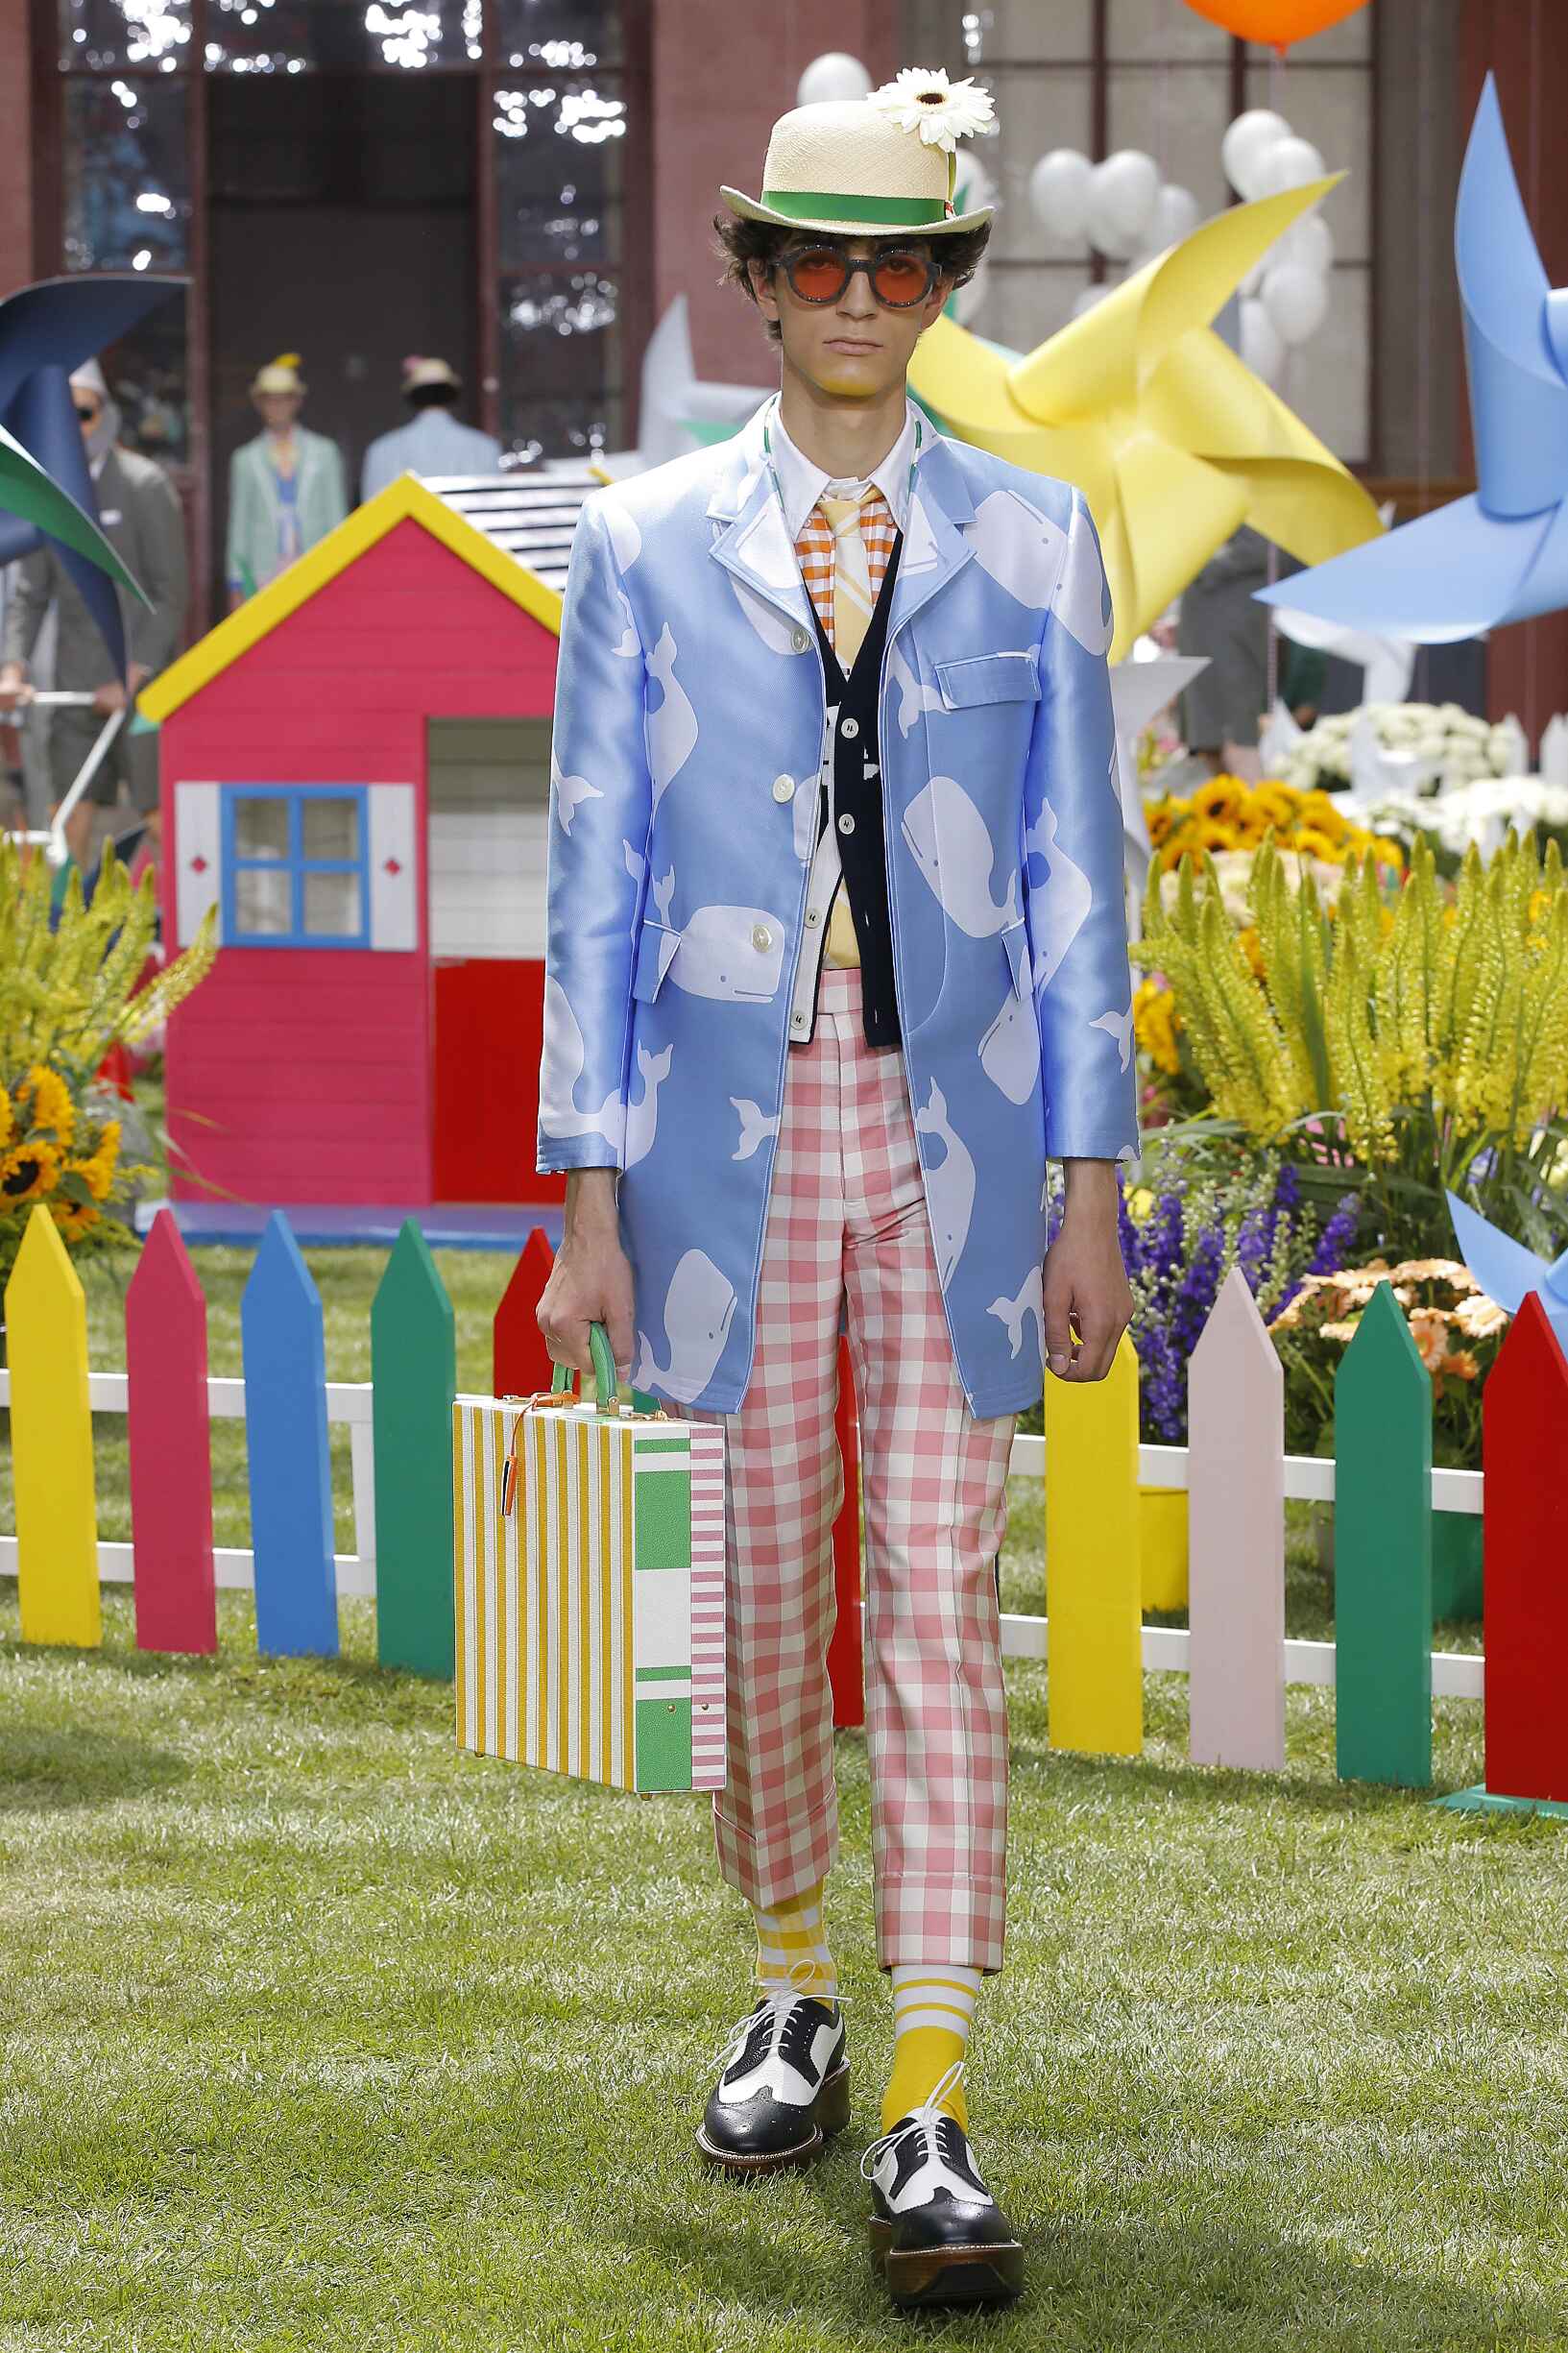 THOM BROWNE SPRING SUMMER 2019 MEN’S COLLECTION | The Skinny Beep